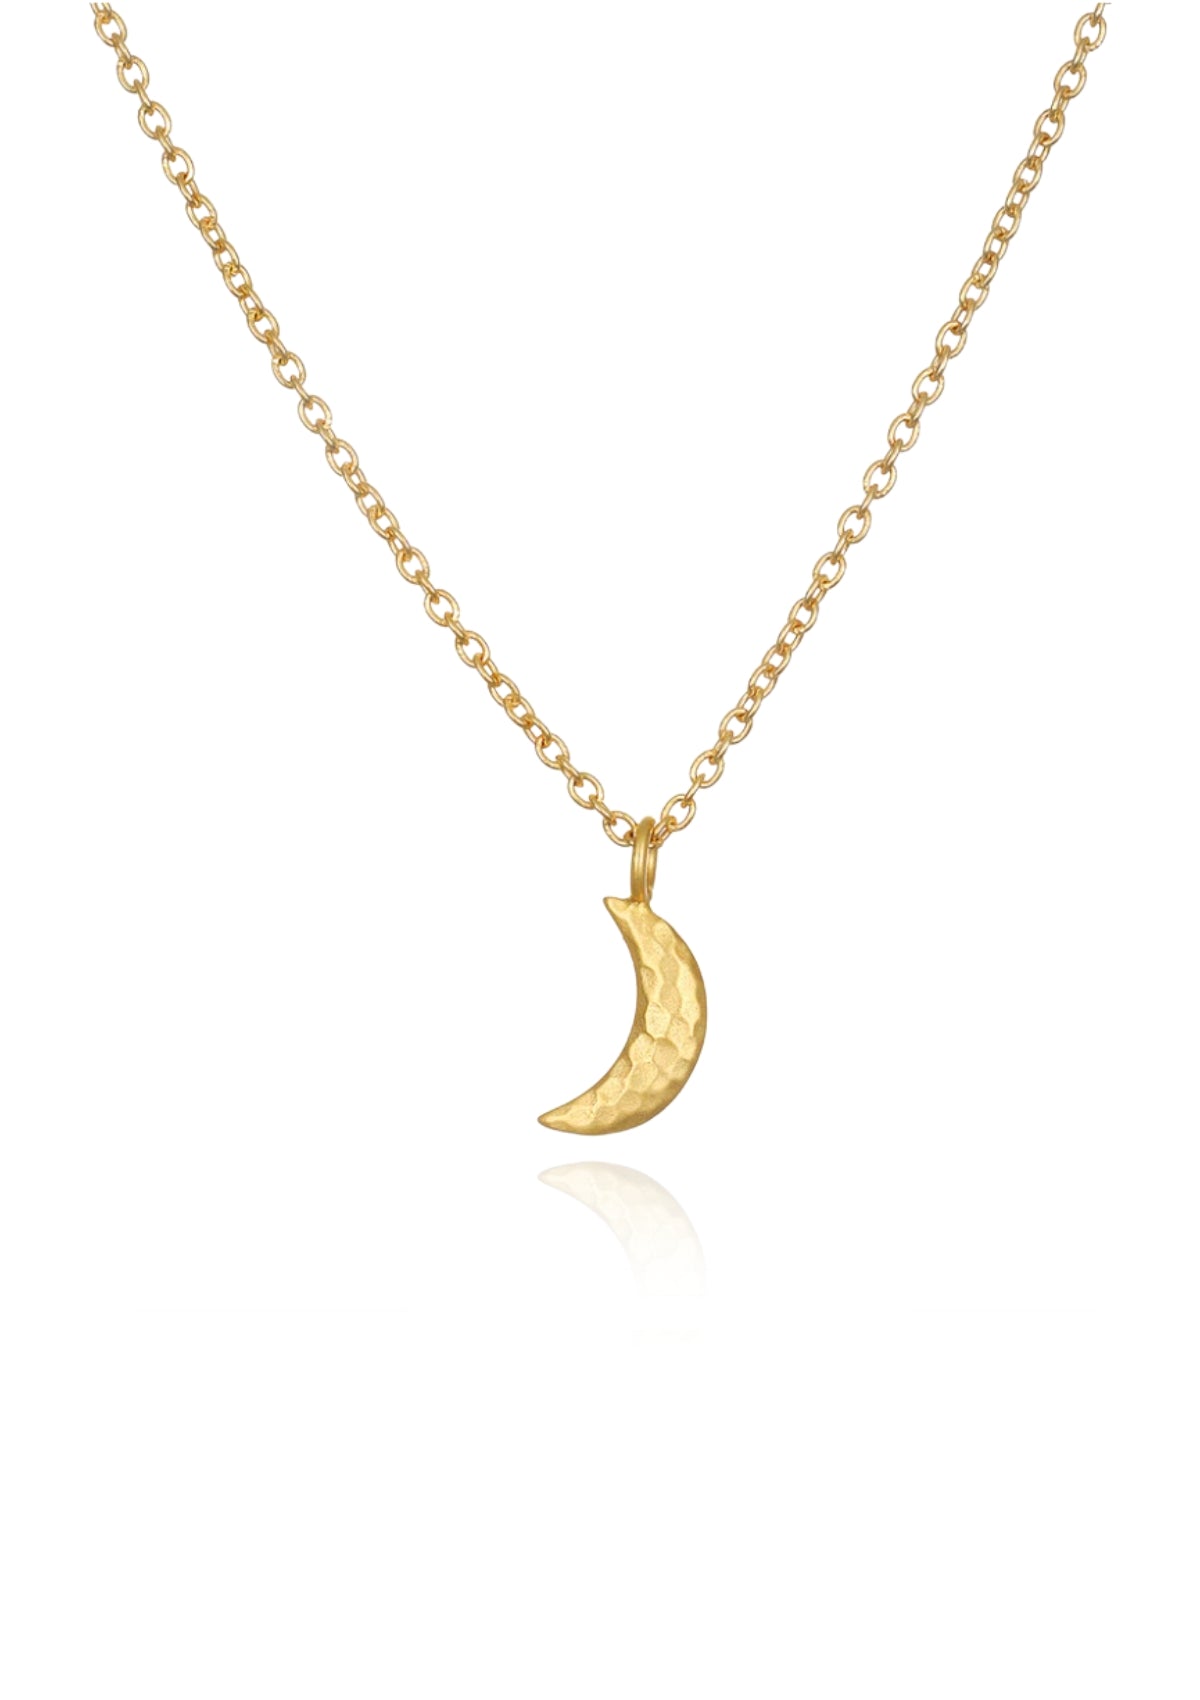 Crescent Moon Necklace, 16" -Satya Jewelry- Ruby Jane-